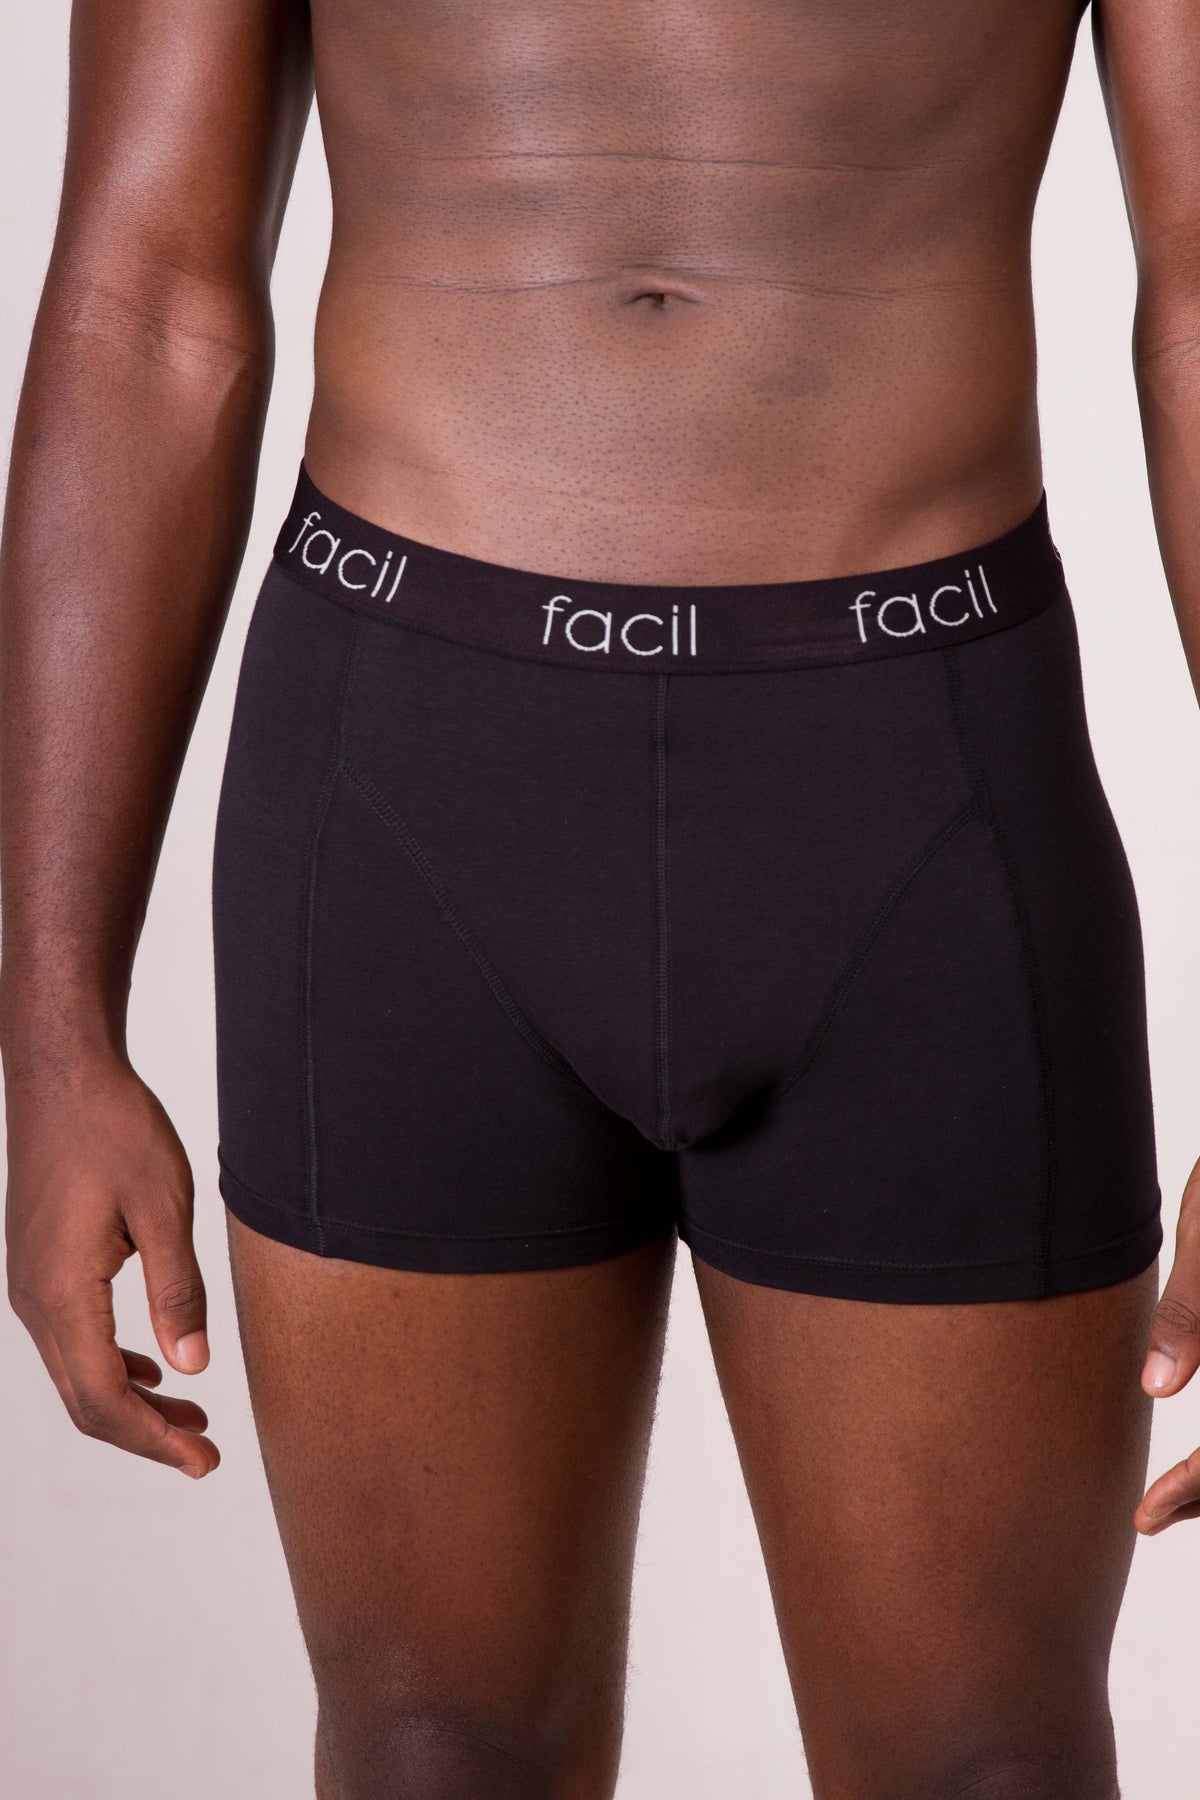 a close up of a person wearing a pair of underwear